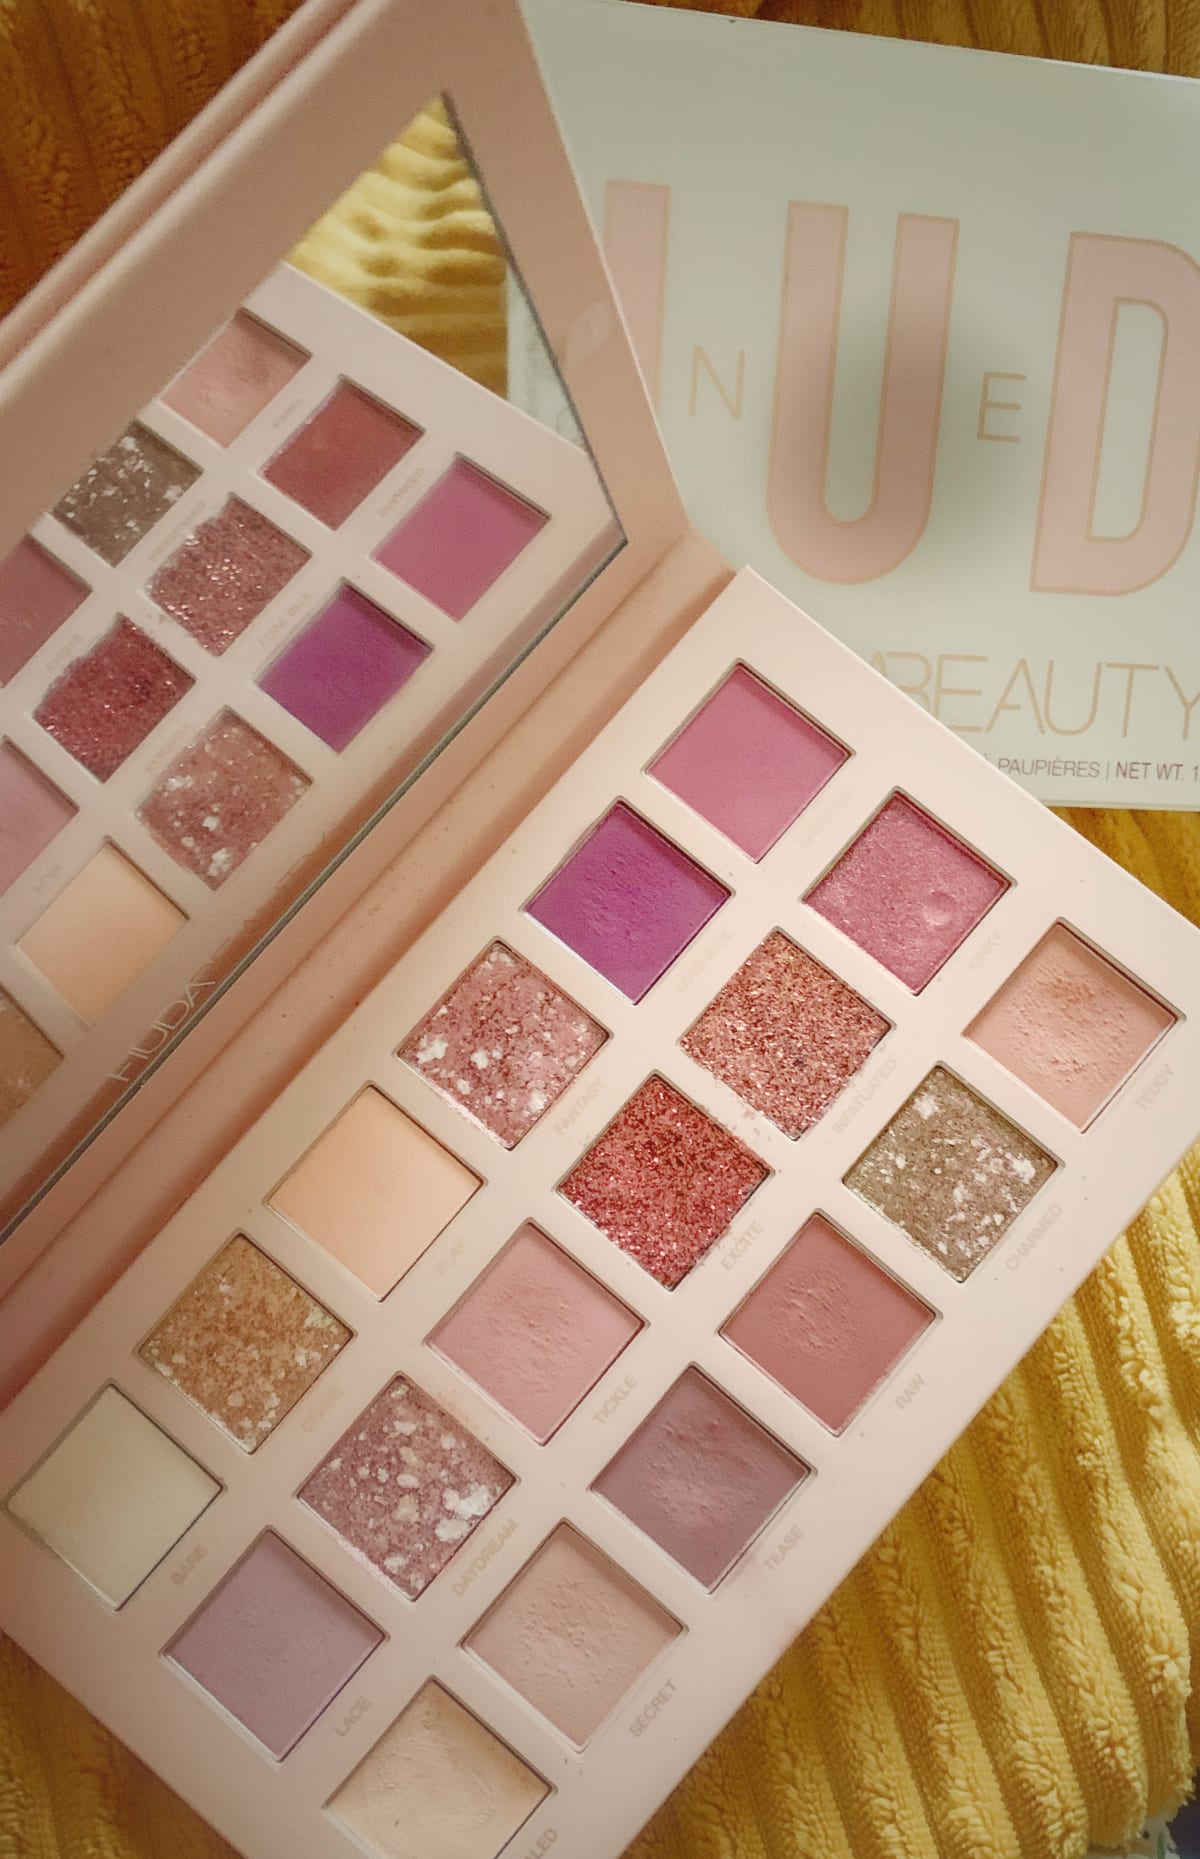 Huda Beauty - The New Nude Palette - review image